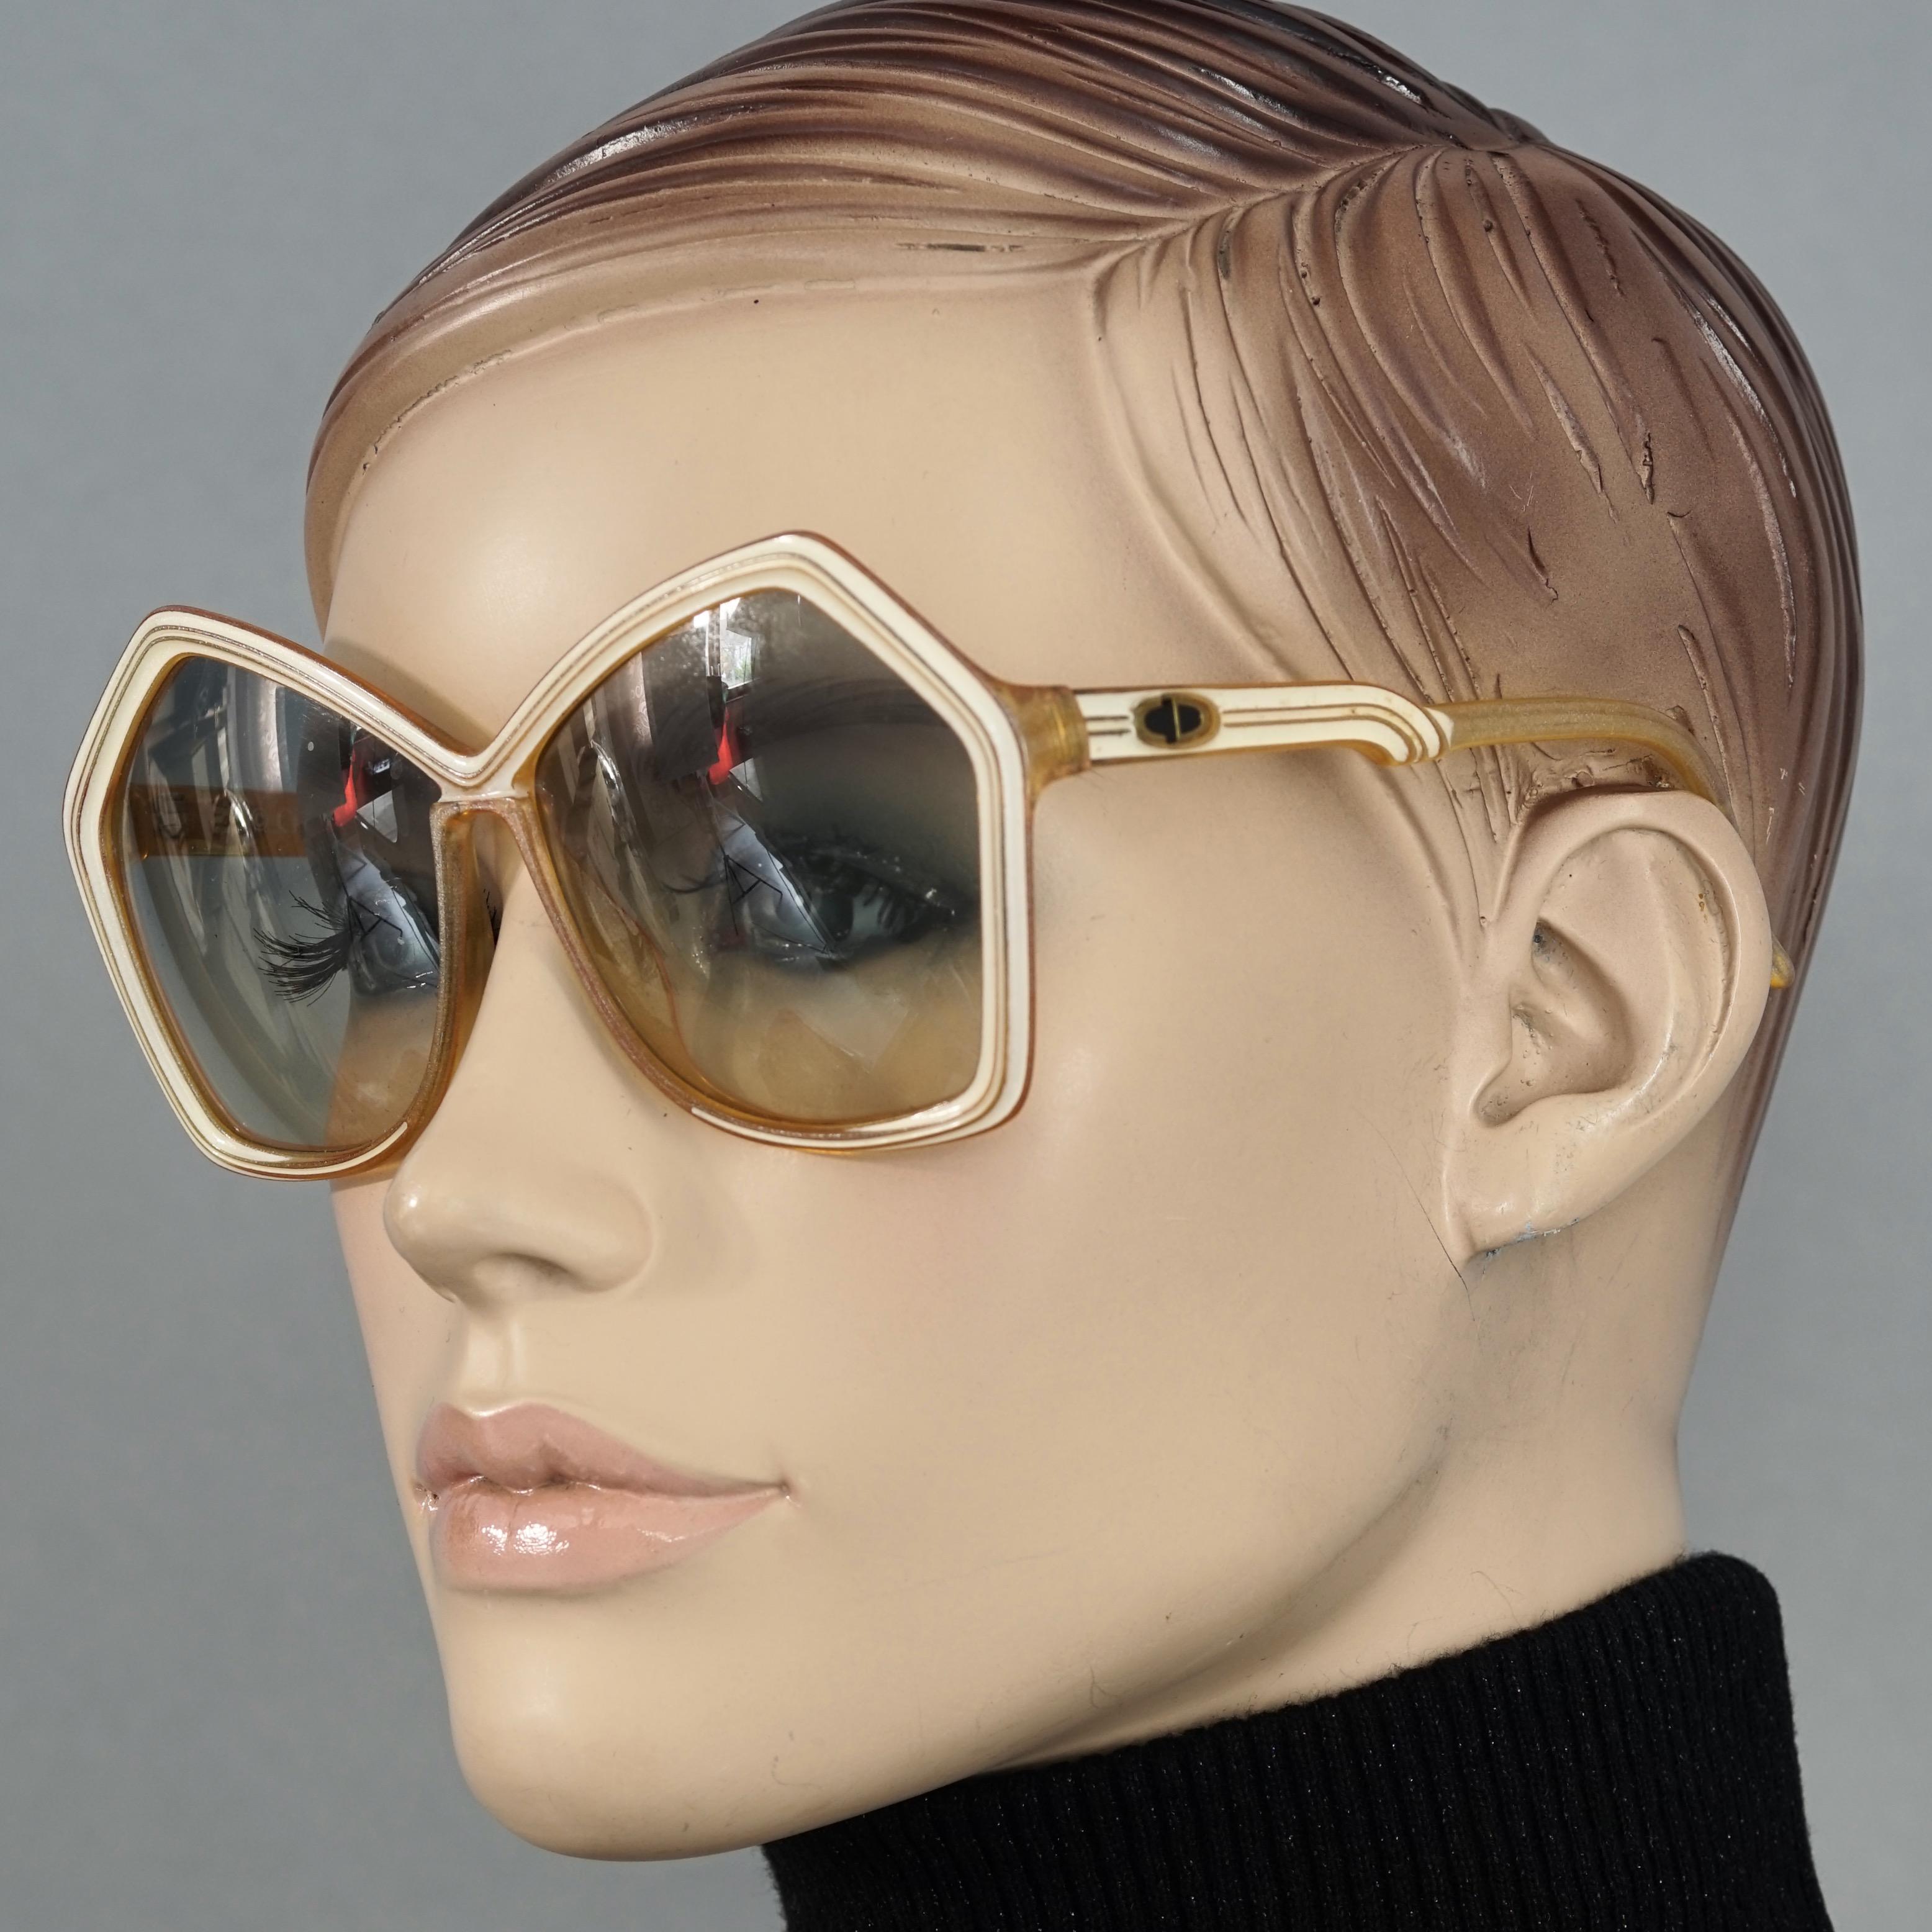 Vintage CHRISTIAN DIOR Pentagon Yellow Sunglasses

Measurements:
Height: 2.55 inches (6.5 cm)
Horizontal Width: 5.59 inches (14.2 cm)
Temples: 4.72 inches (12 cm)

Features:
- 100% Authentic Vintage CHRISTIAN DIOR. 
- Yellow pentagon sunglasses with